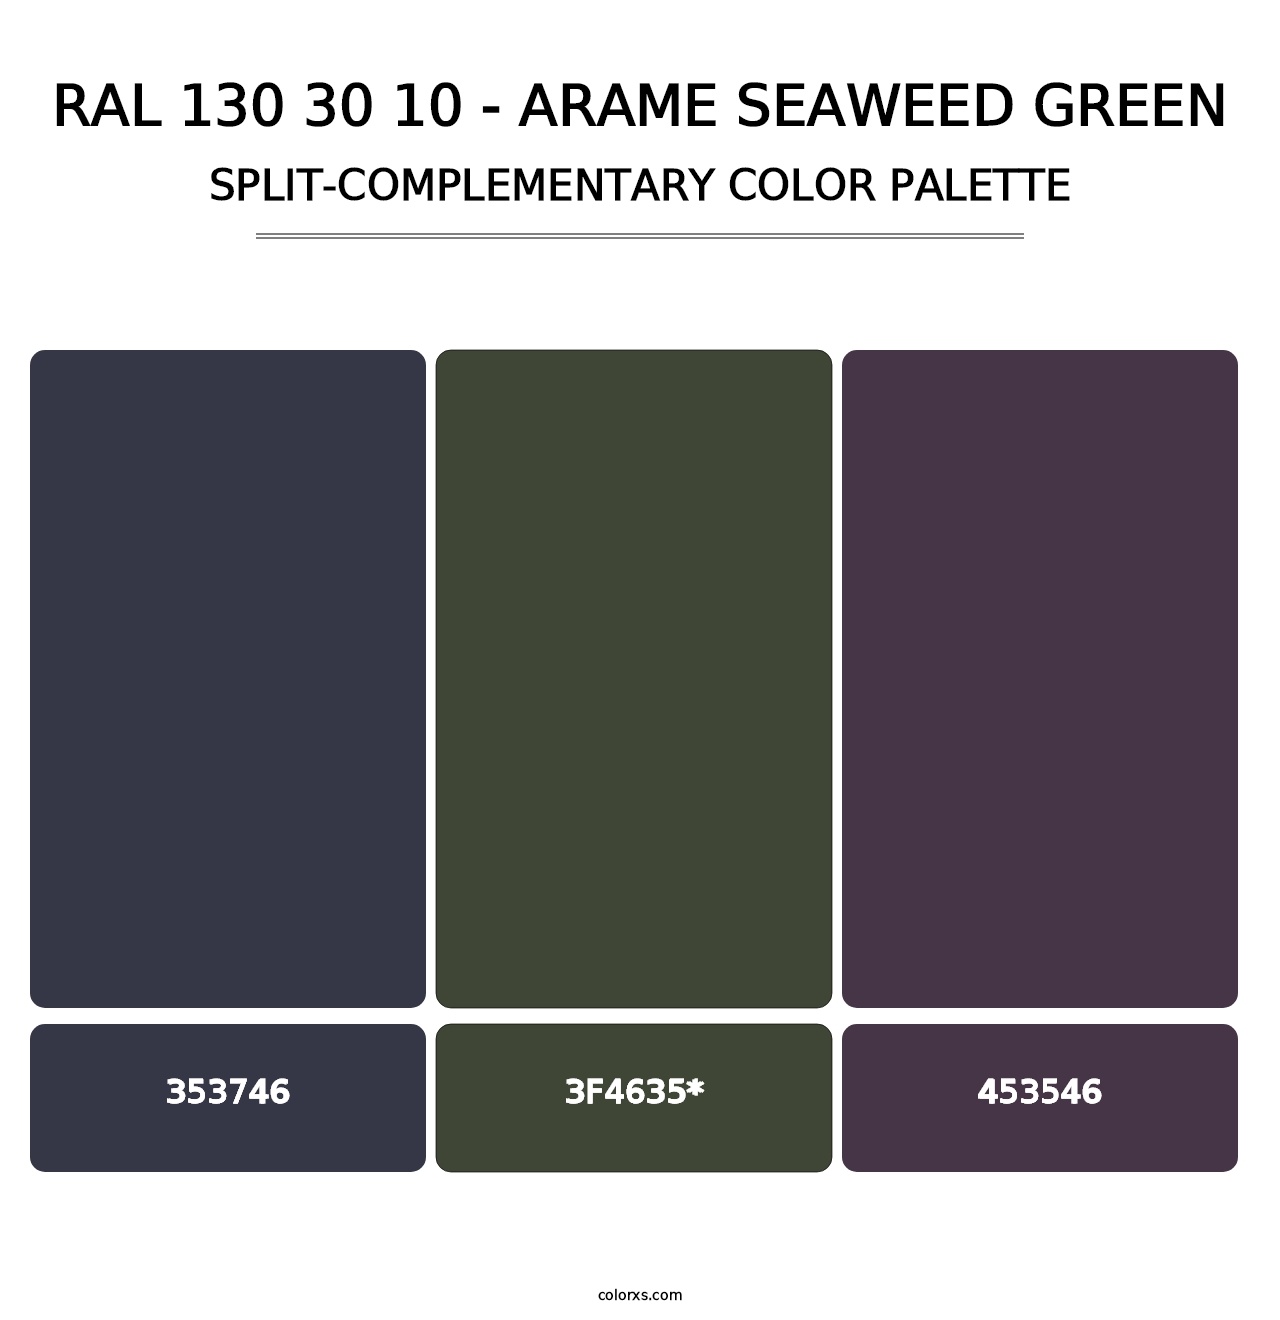 RAL 130 30 10 - Arame Seaweed Green - Split-Complementary Color Palette